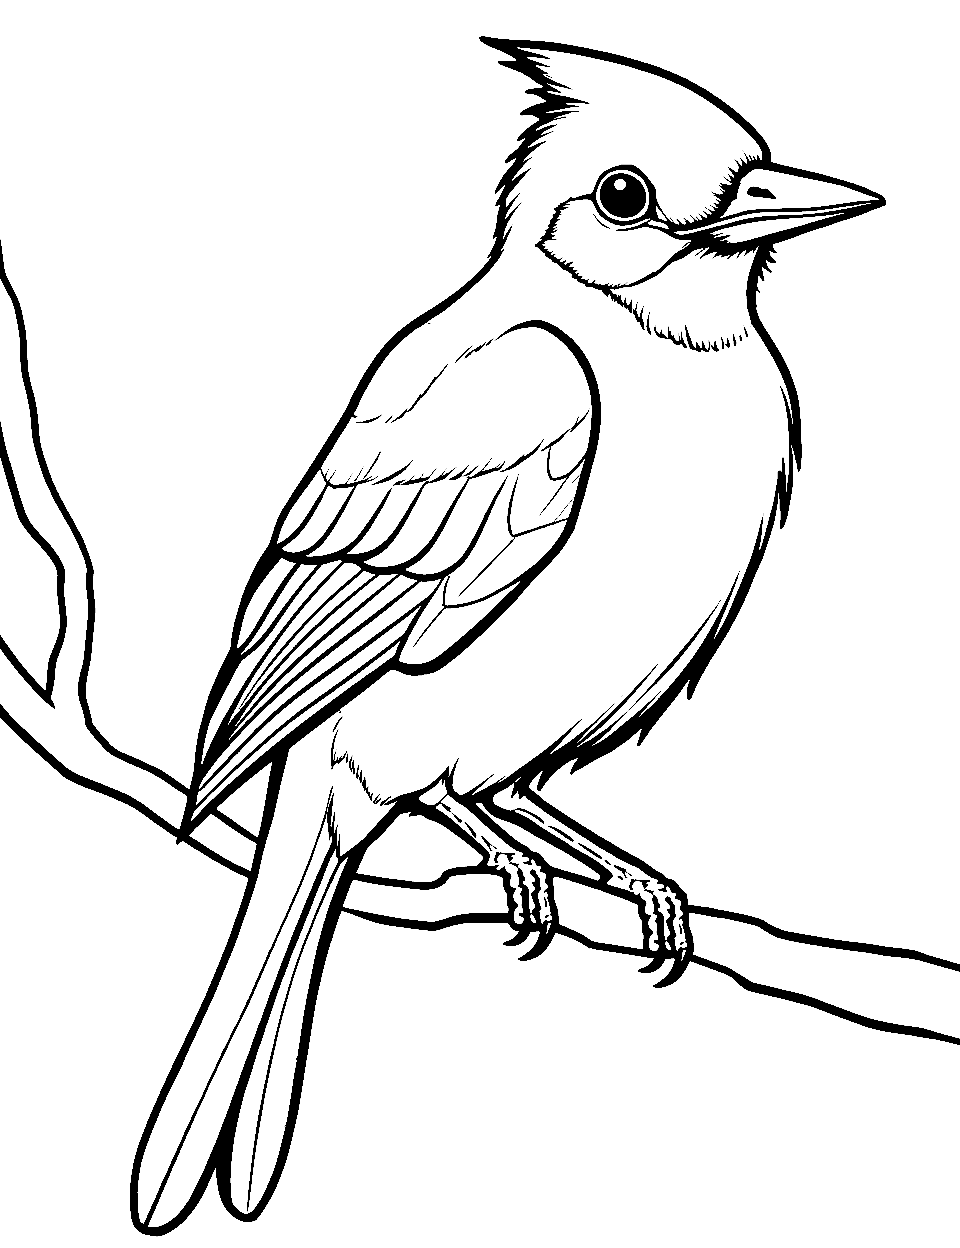 Coloring Page Outline Of A Cute Singing Bird Posters, Art Prints